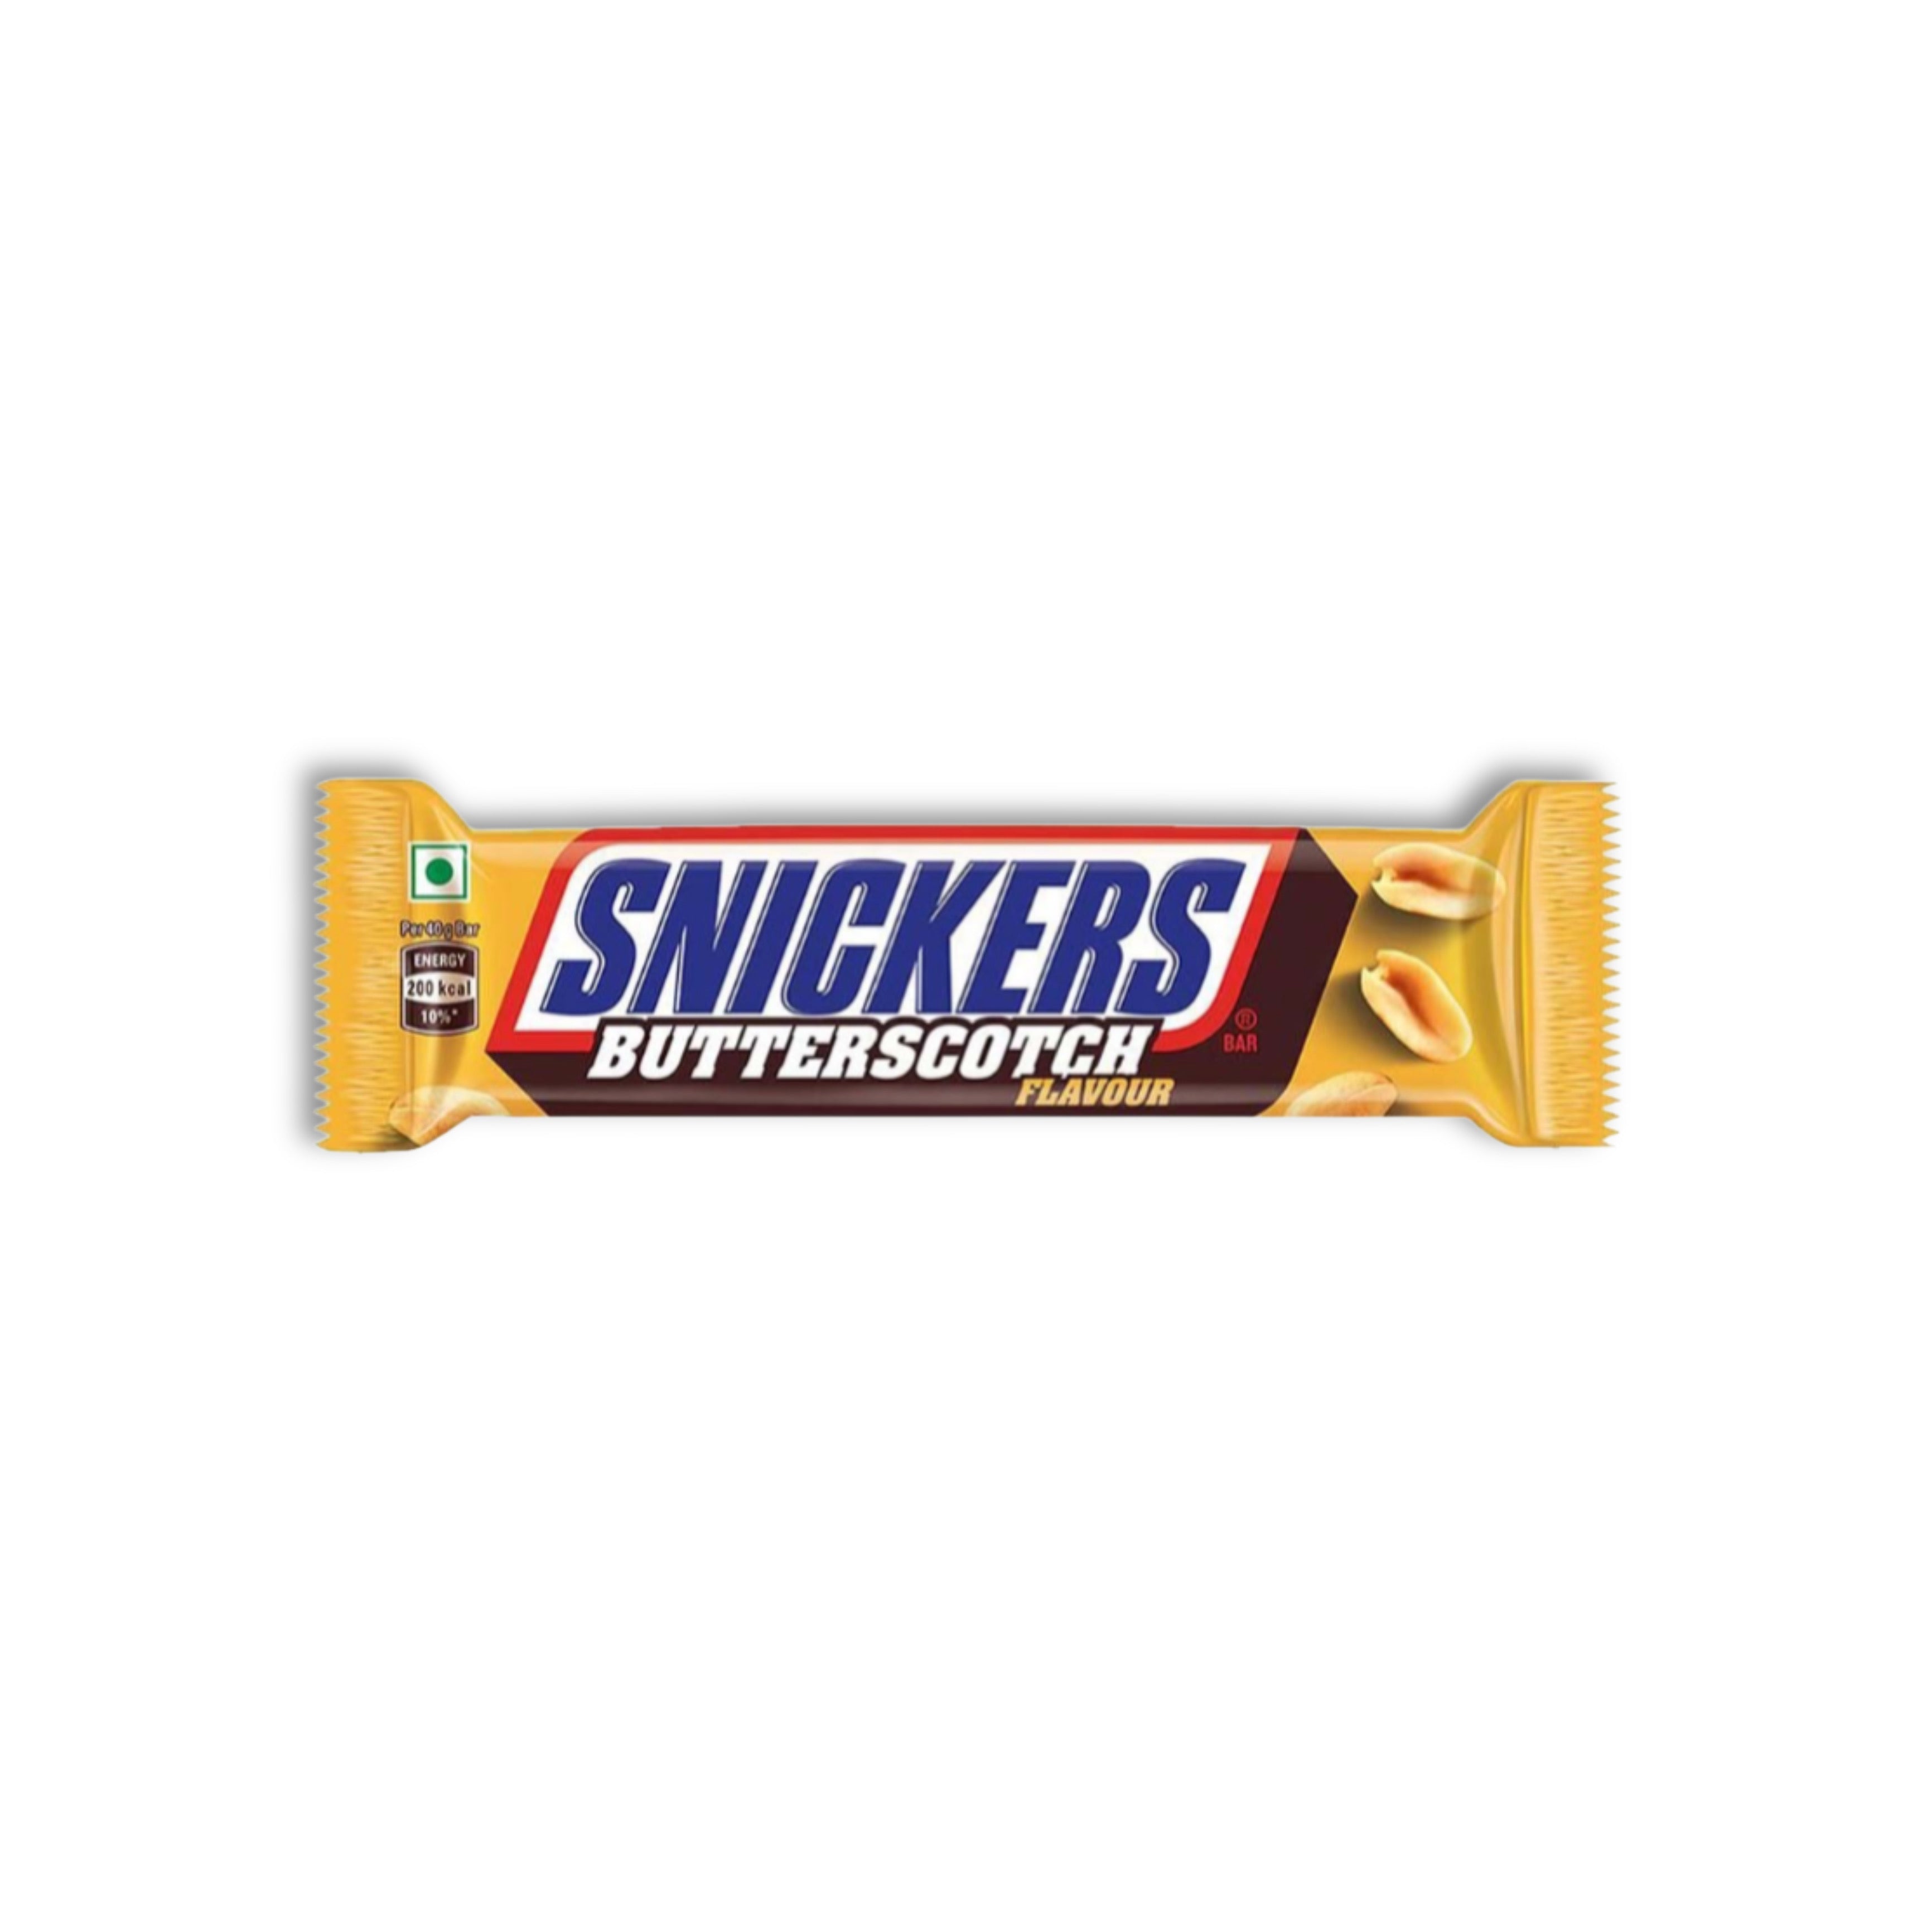 Snickers - Butterscotch